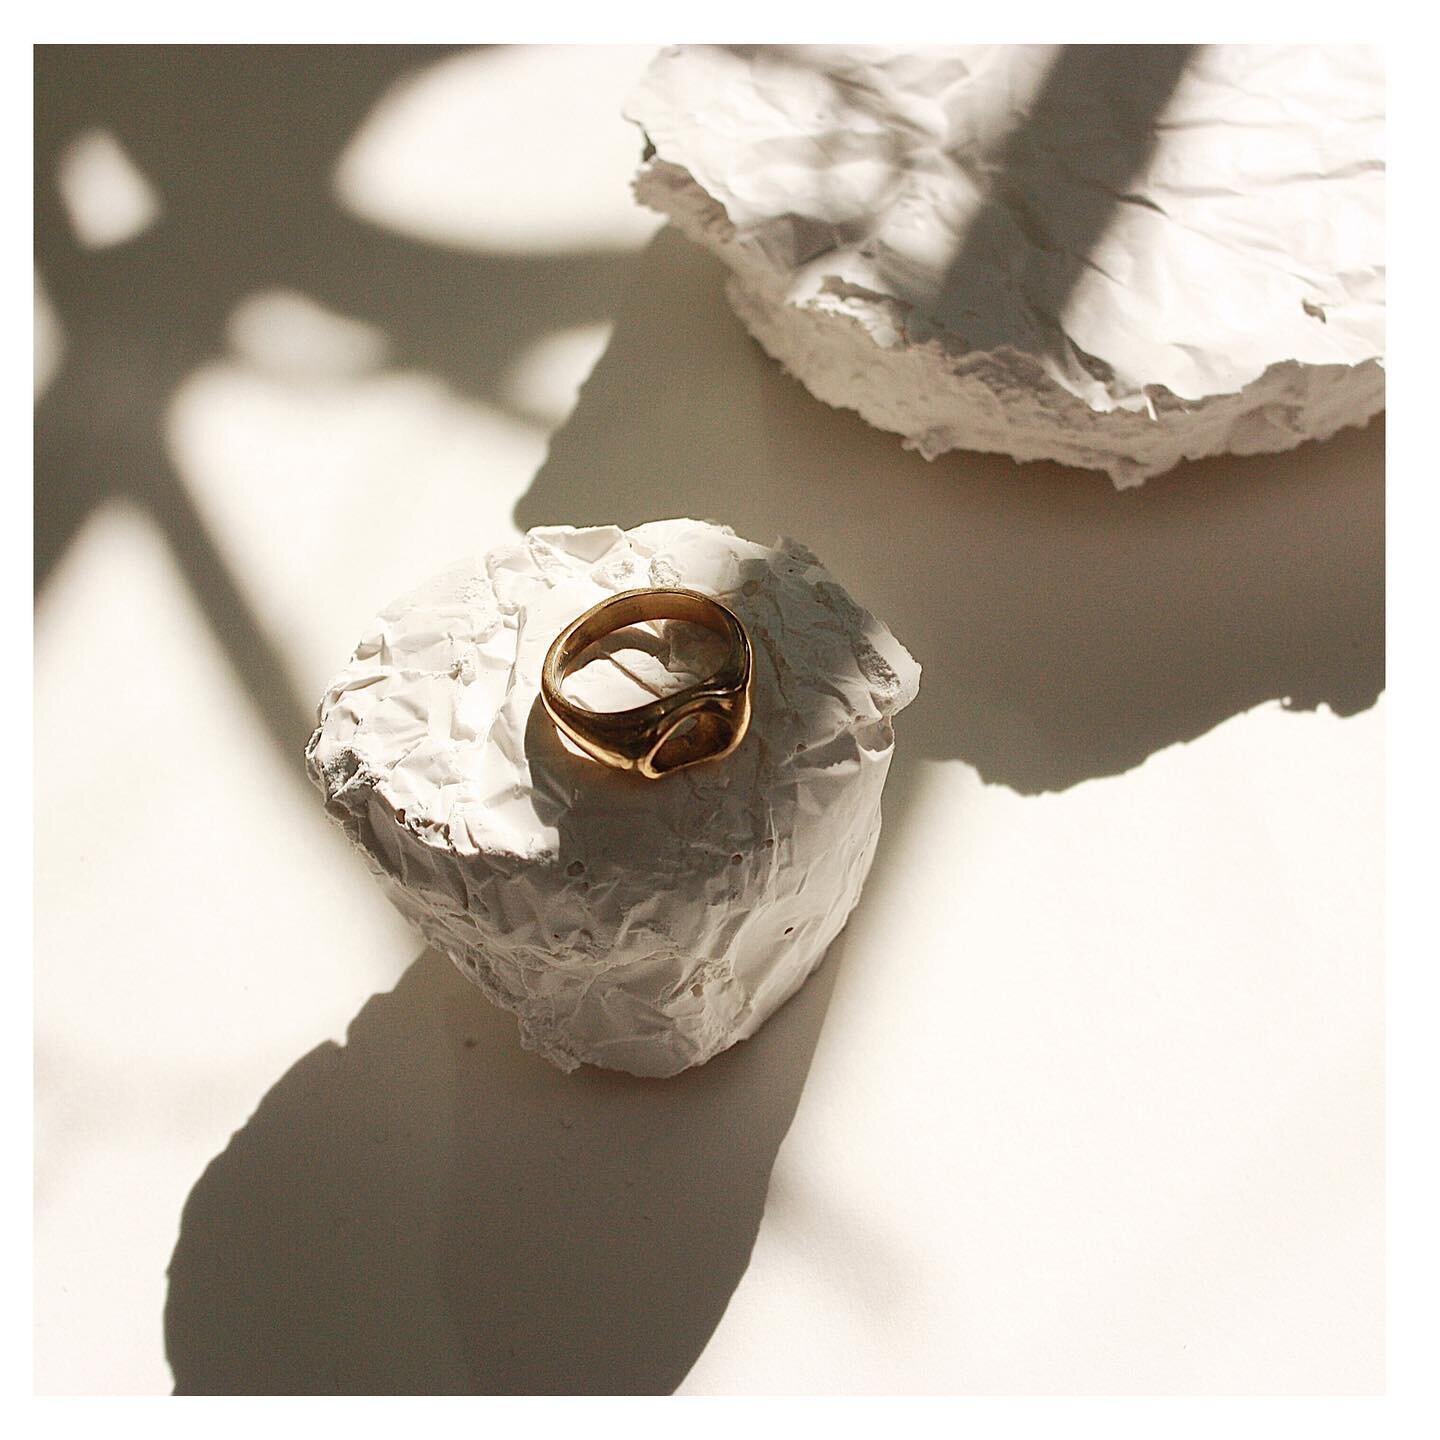 Here&rsquo;s a peek at one of the new rings that I&rsquo;ve been working on lately. I really wasn&rsquo;t sure if I wanted to (or could really) release a Fall &ldquo;collection&rdquo; so instead I&rsquo;m deciding to release just a few pieces at a ti